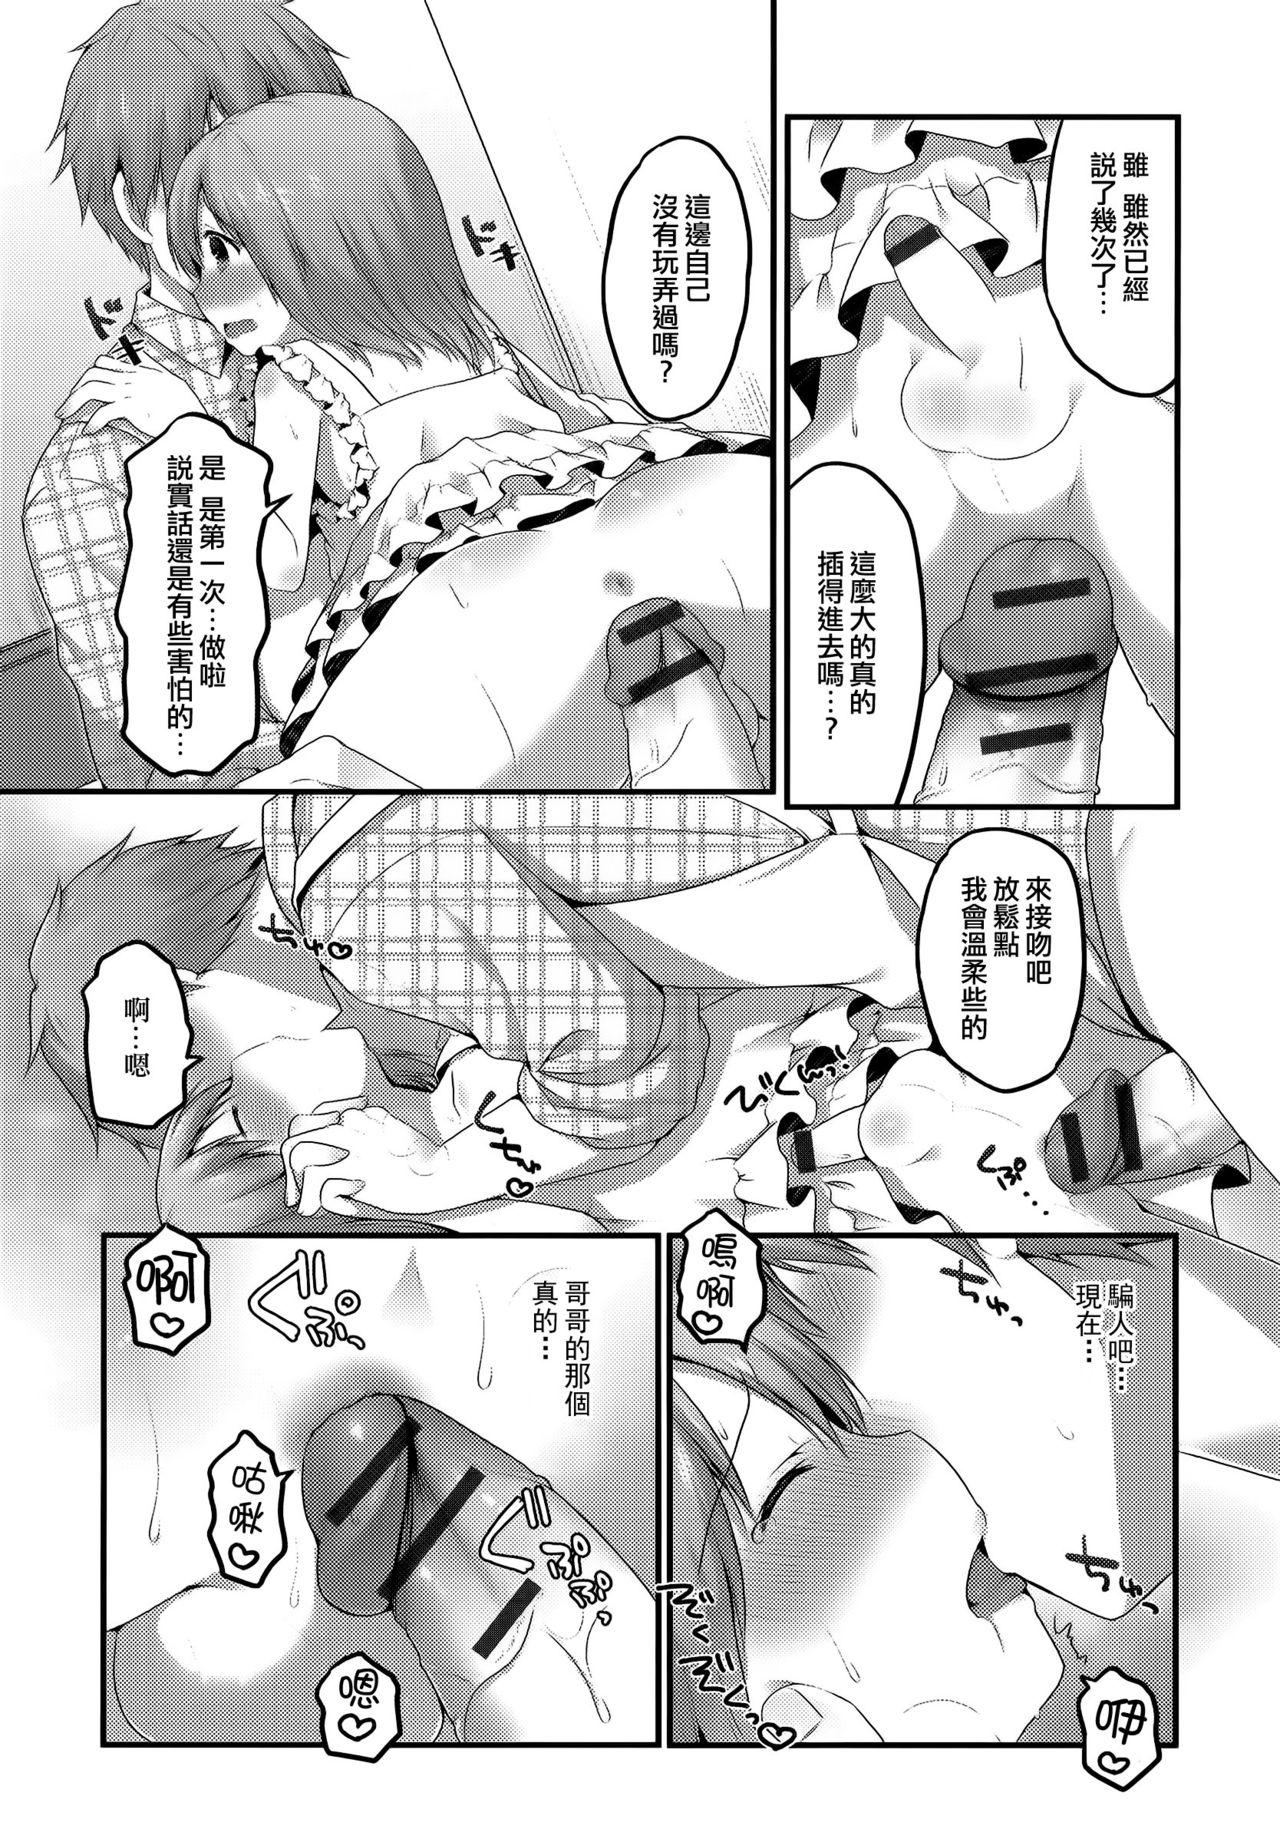 Pegging Mousou Sketch Ameture Porn - Page 12